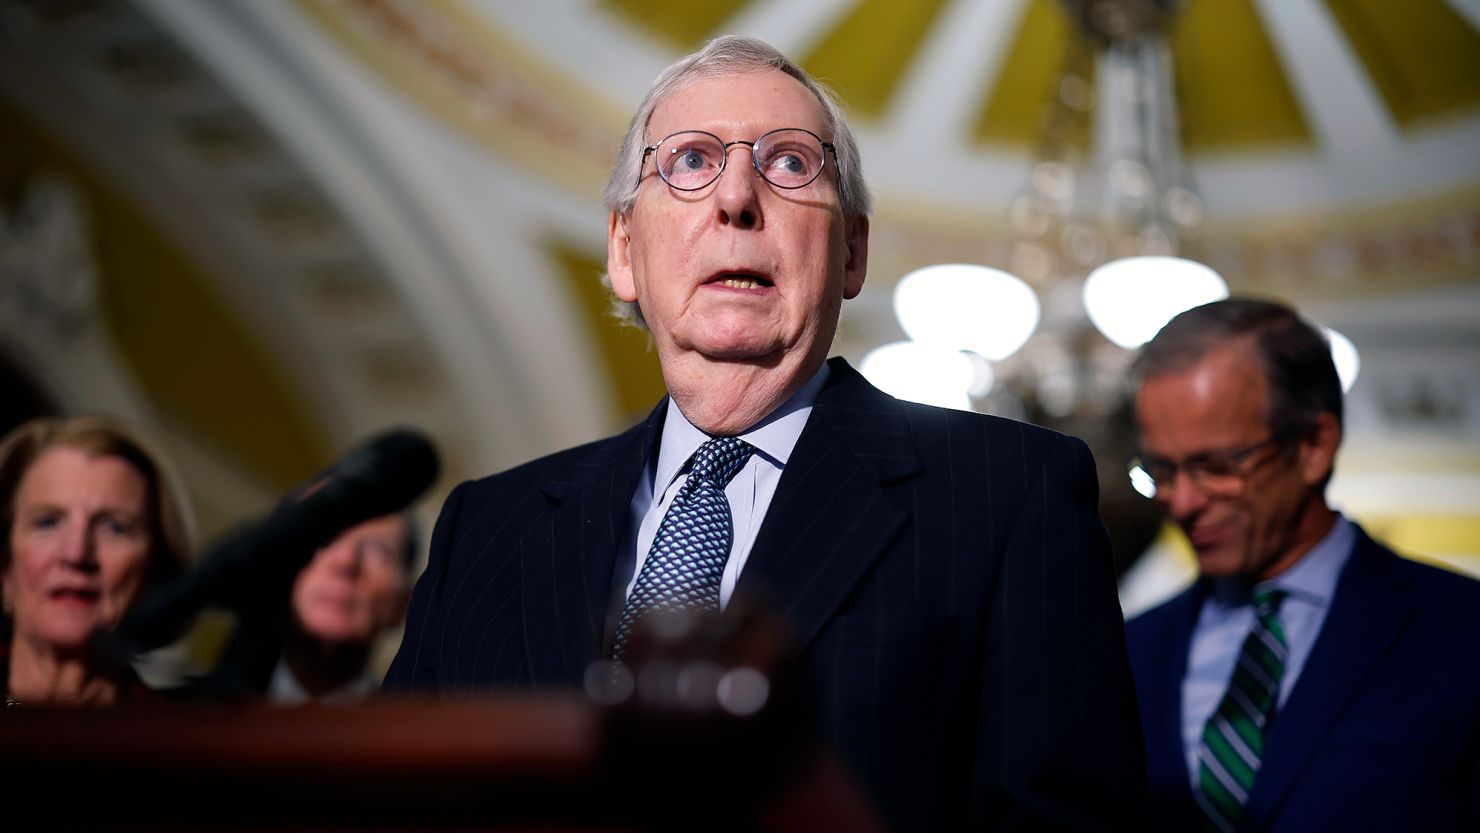 Gop Leader Mitch Mcconnell At Rehab Facility After Hospital Stay Also Suffered Rib Fracture